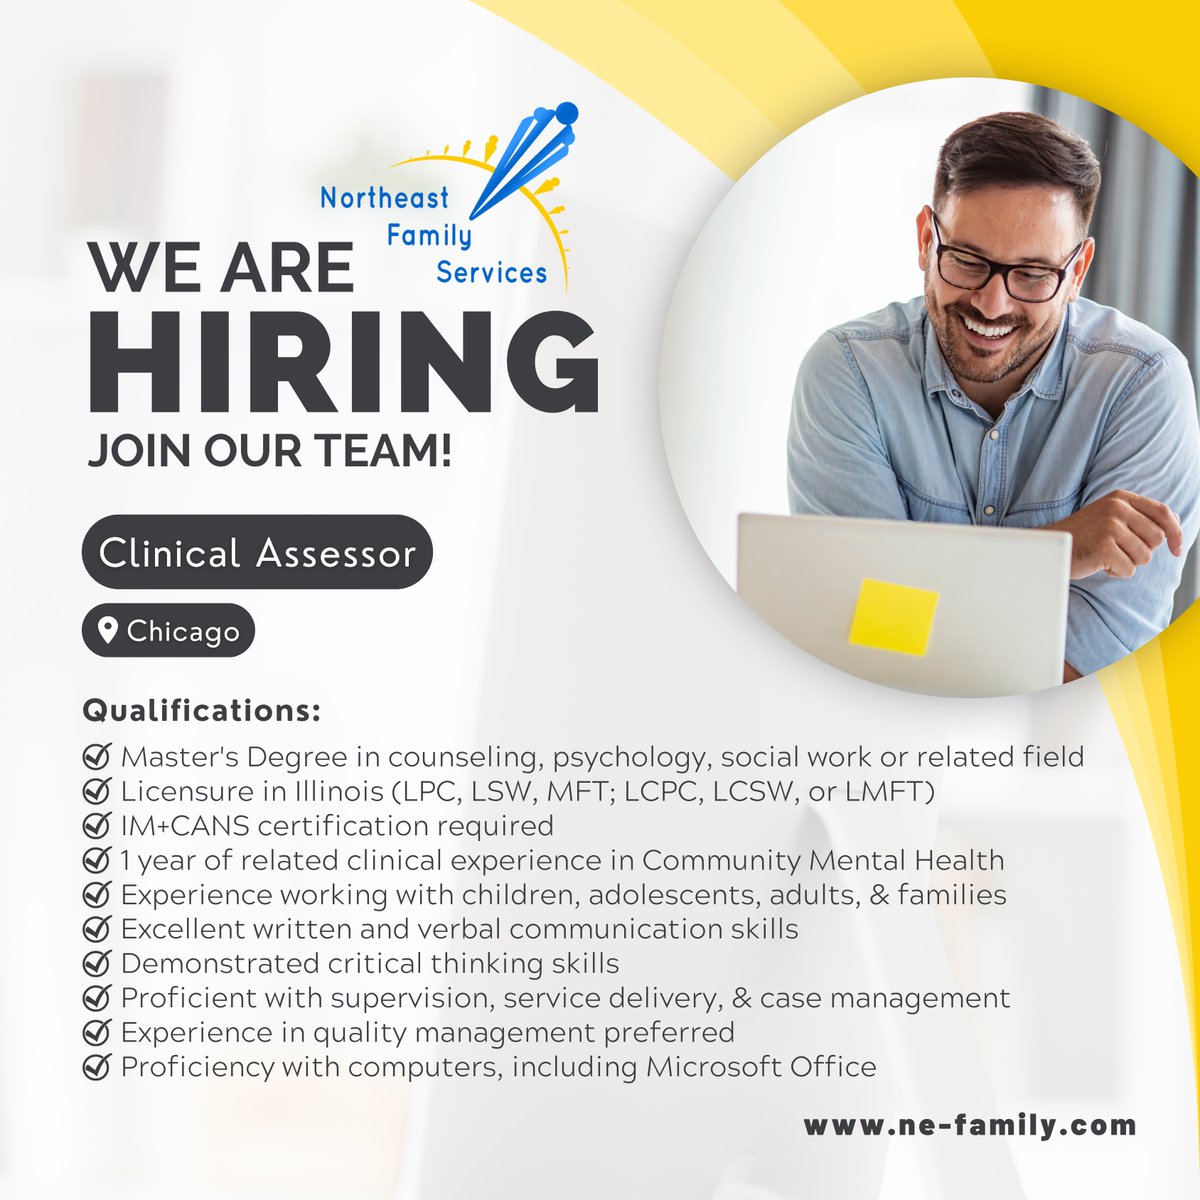 NFS is #hiring a Clinical Assessor in #Chicago. Apply: lnkd.in/ee8aGJze

#NortheastFamilyServices #NFSWhereQualityMatters #JoinOurTeam

#ChicagoJobs #HiringChicago #Illinois #IllinoisJobs #HiringIllinois #IL #ILJobs #HiringIL